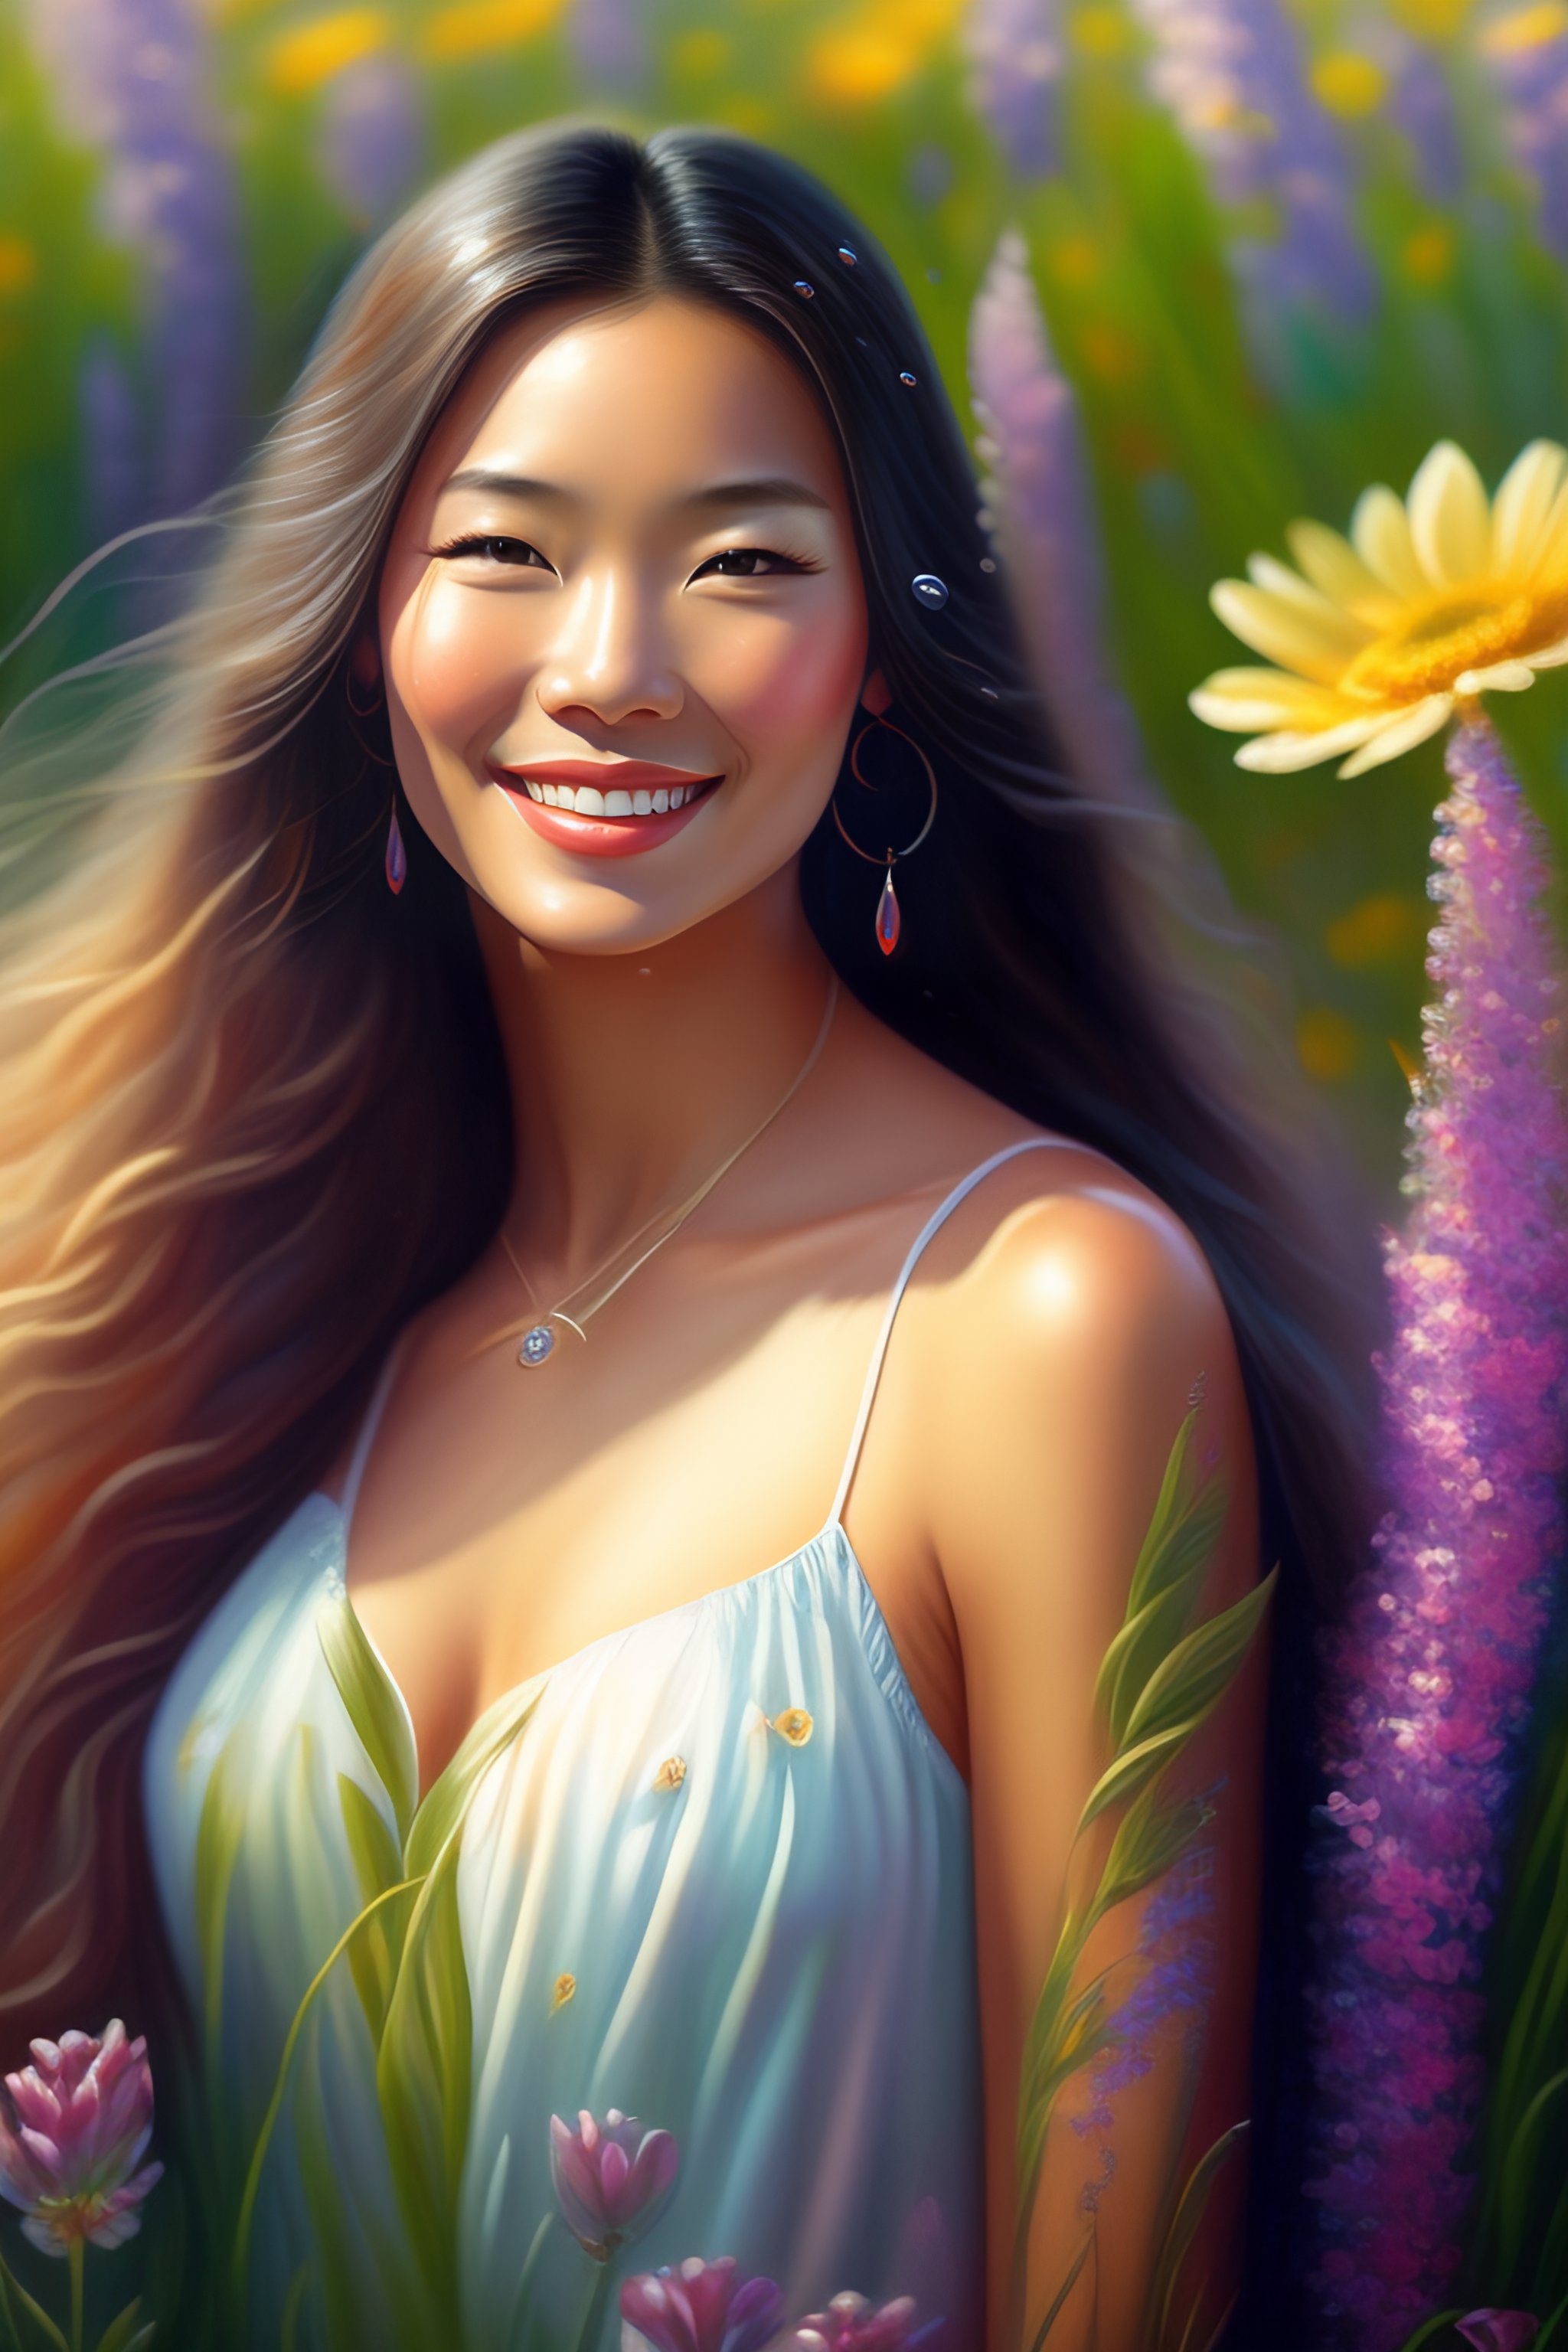 Lexica A Painting Of A Woman In A Field Of Flowers A Photorealistic Painting By Chen Chun